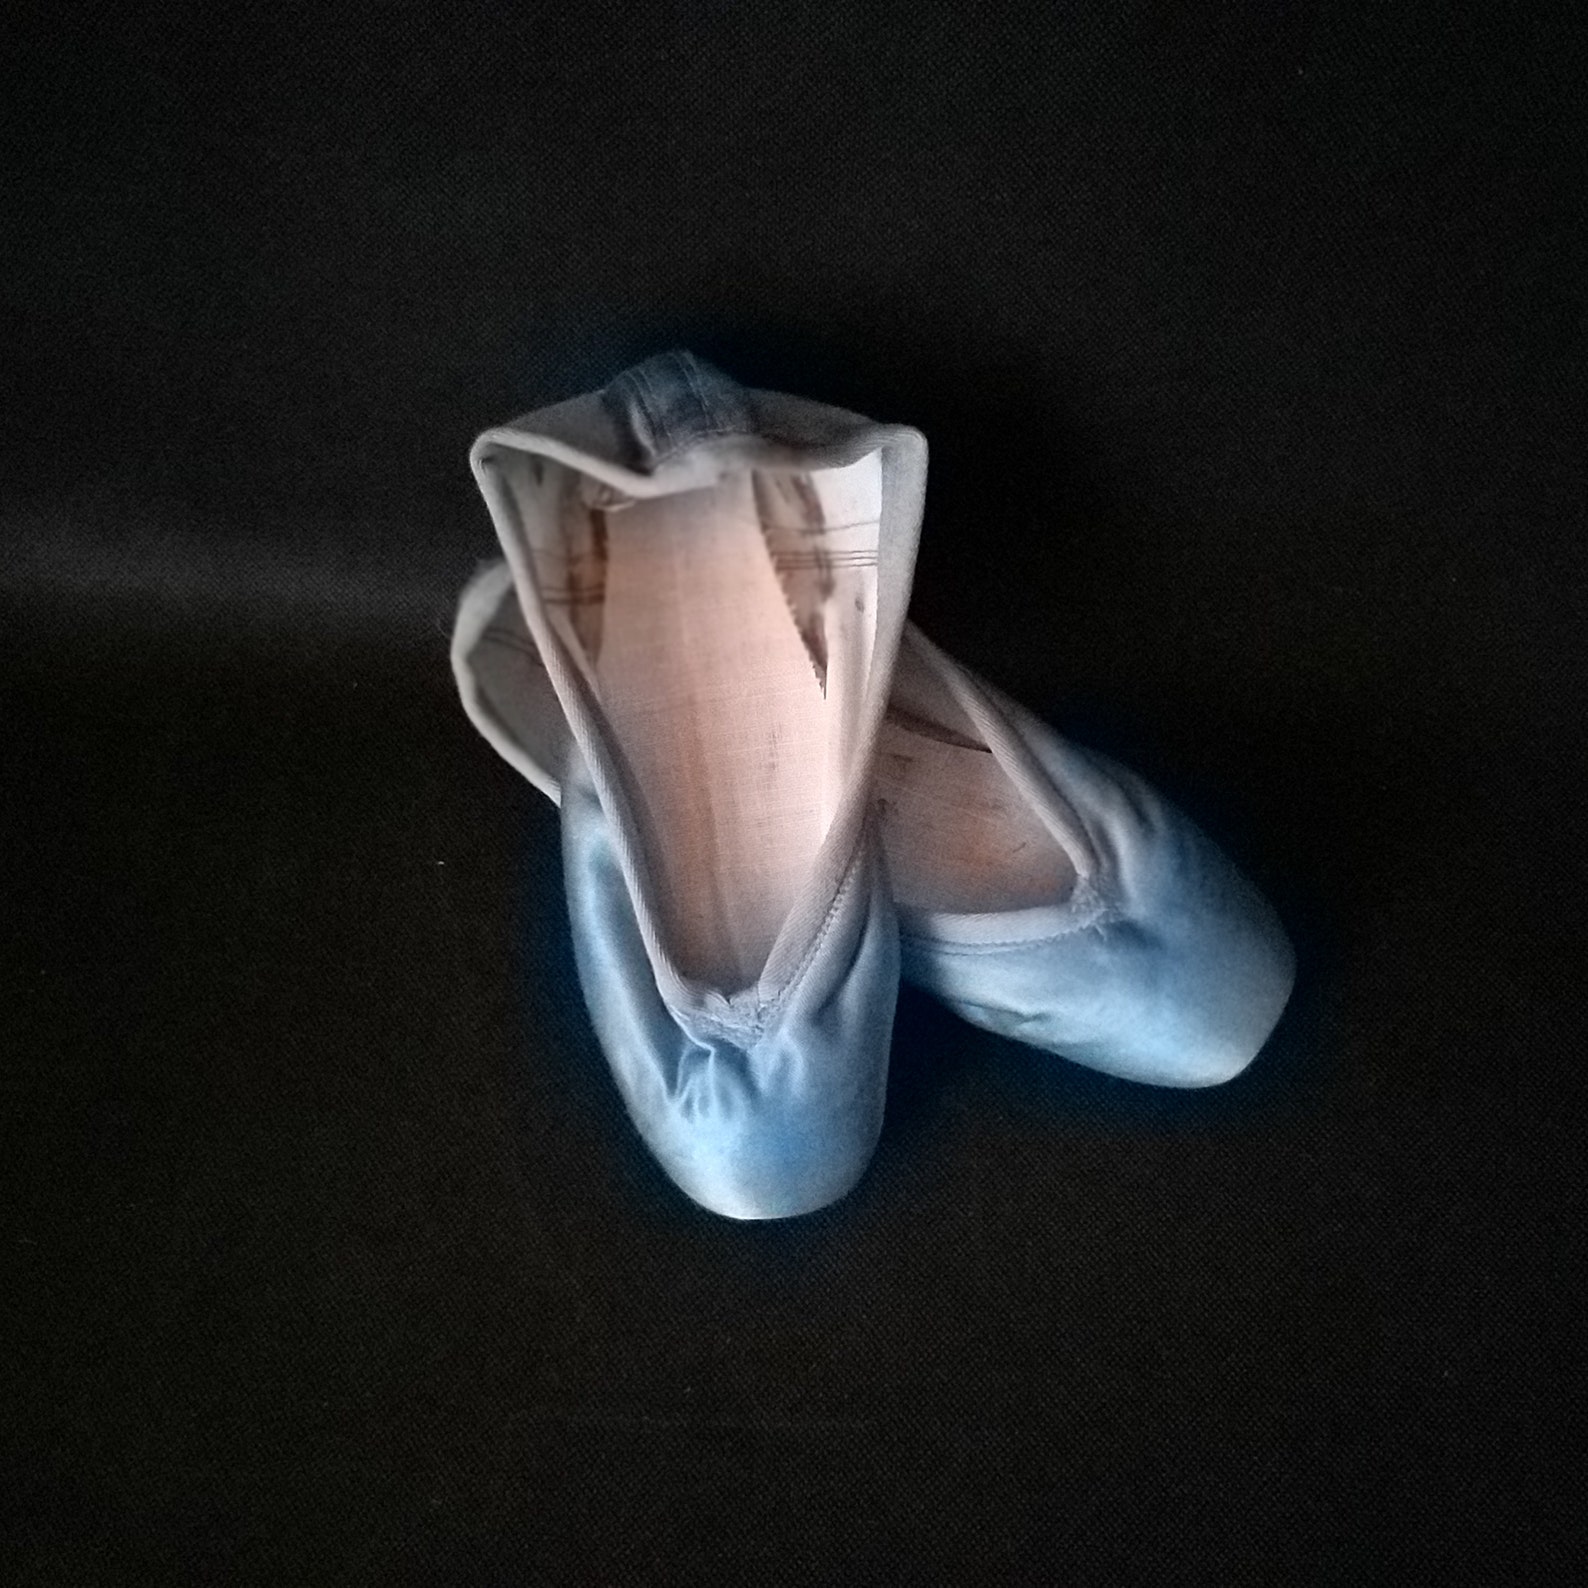 blue satin ballet pointe shoes vintage pair of pointe shoes slippers little girls shabby ballet shoes french romantic décor vint